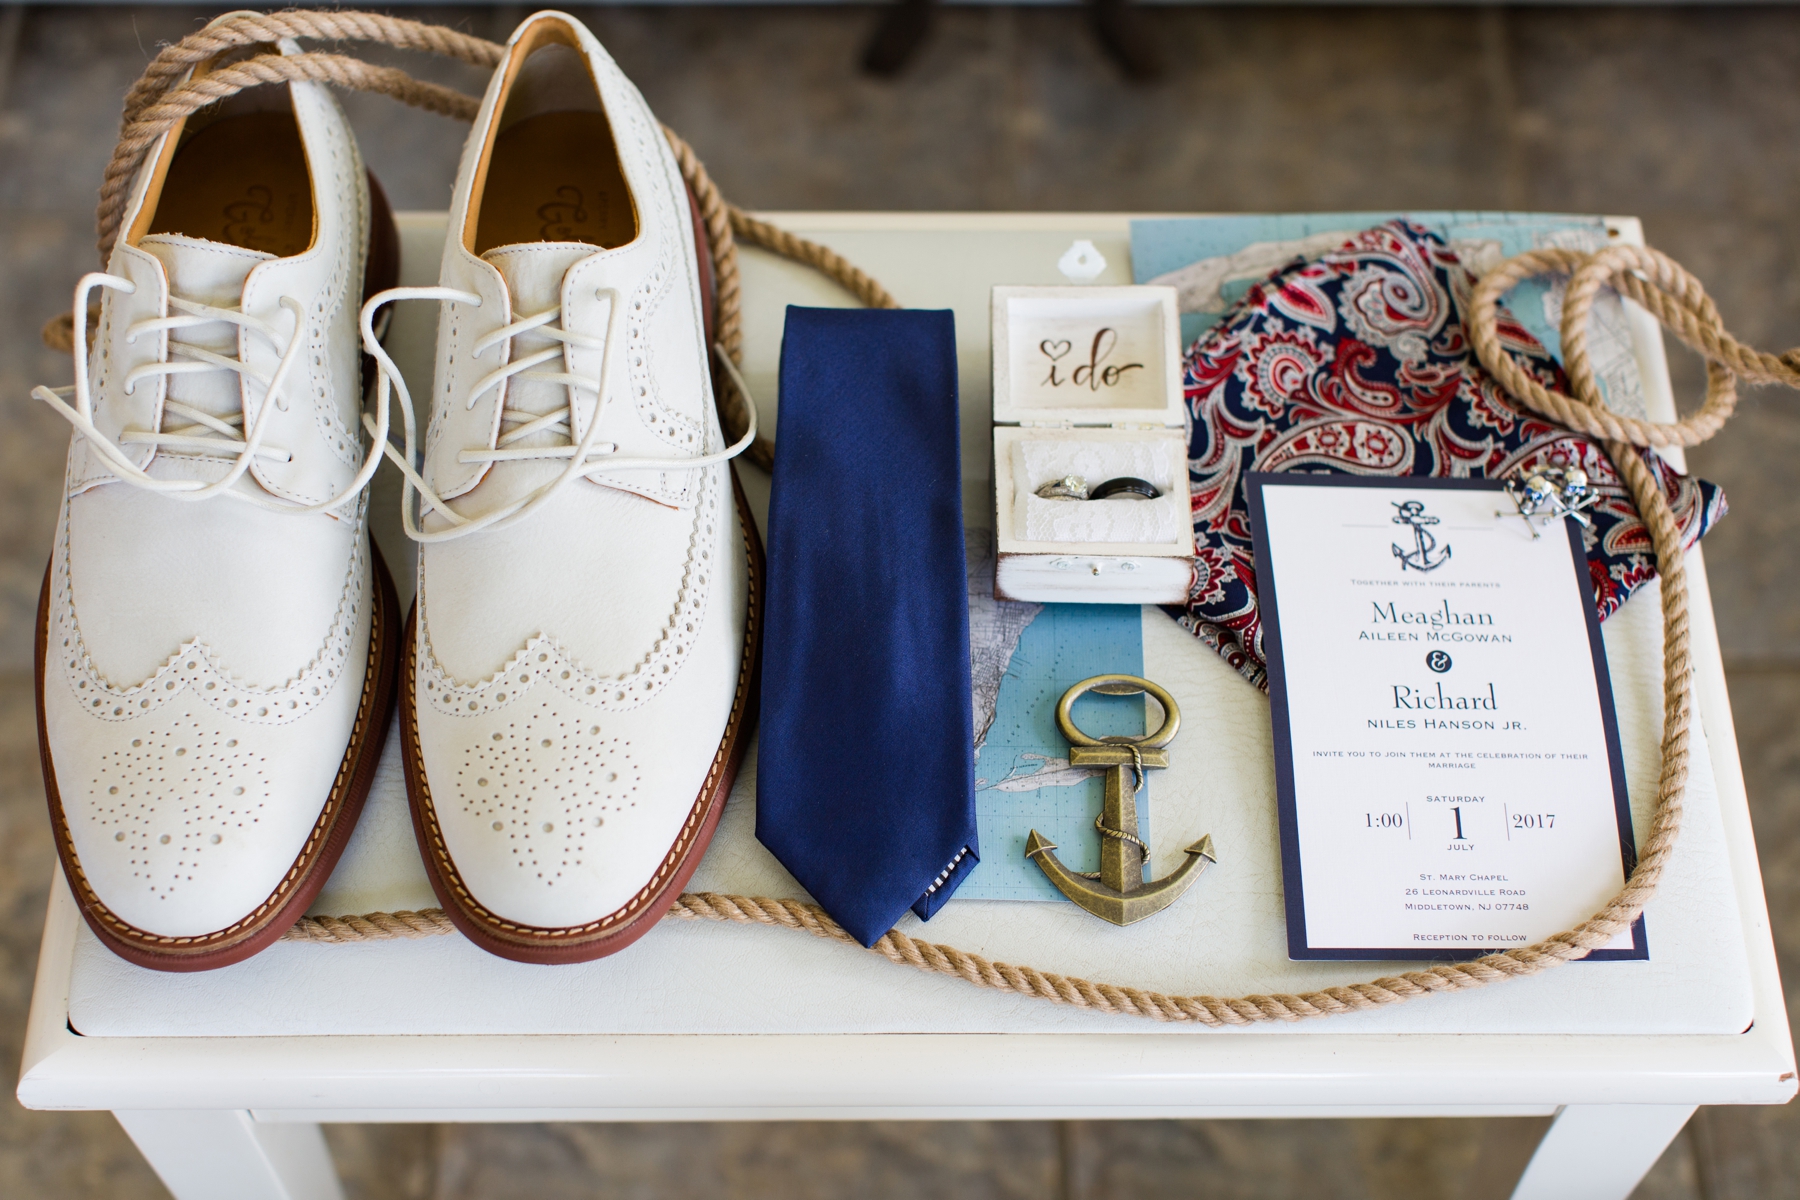 Meaghan + Richard's Rustic Elegant Wedding at the Water Witch Club in Highlands, NJ